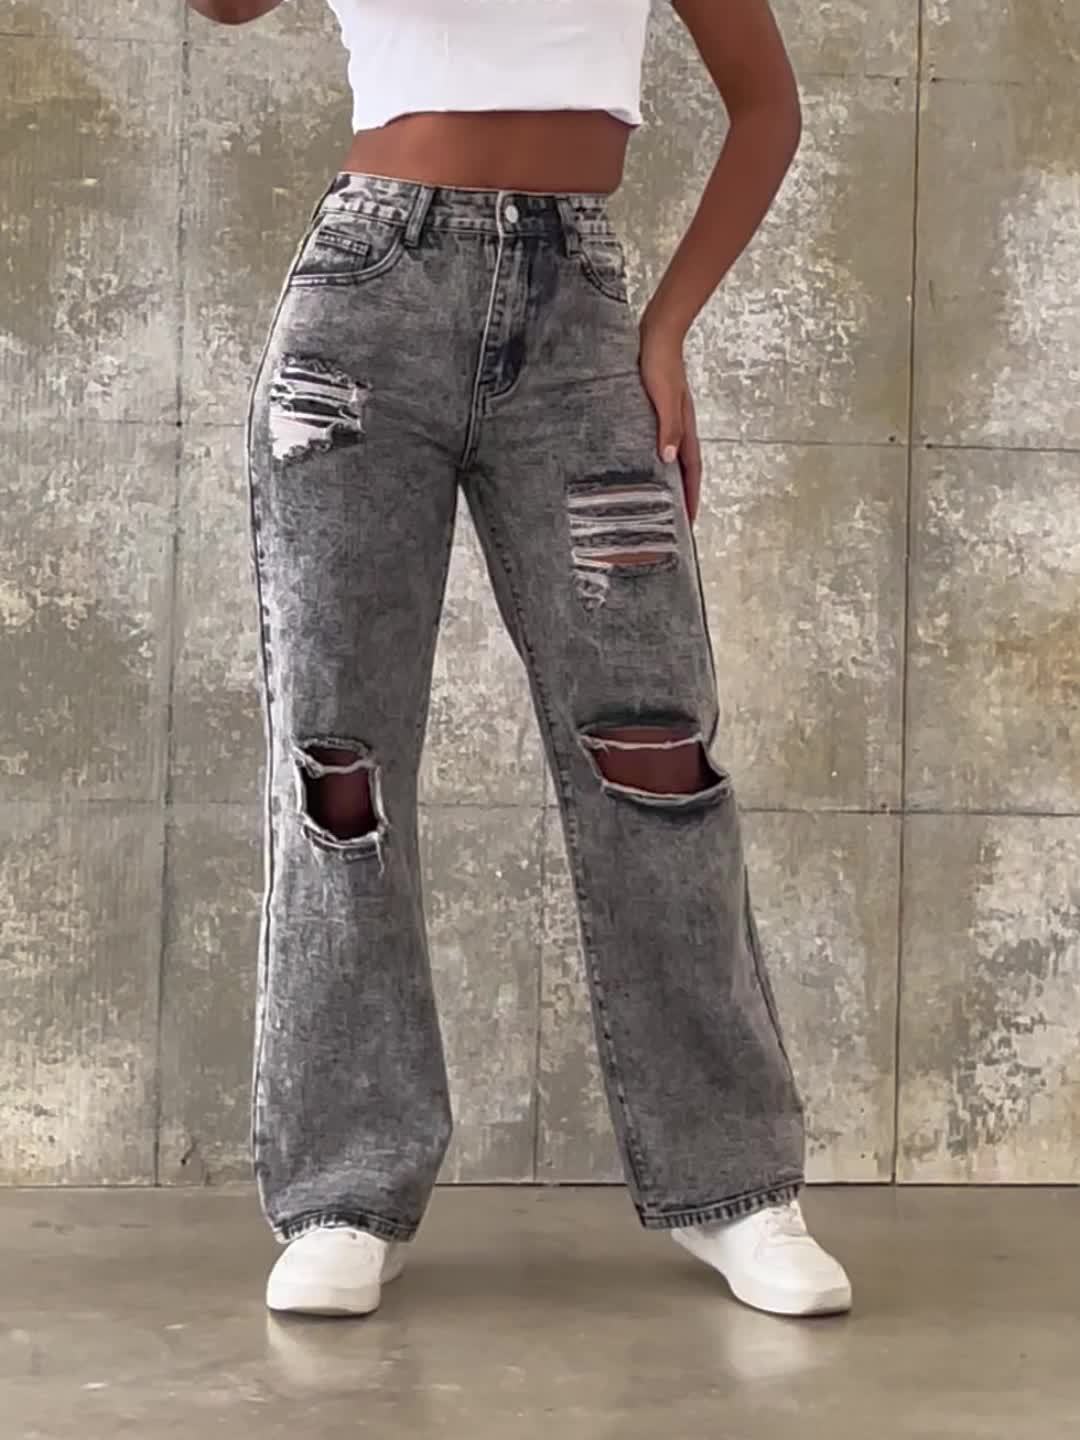 Women's Ripped Jeans Stretchy High Waisted Straight Wide Leg Denim